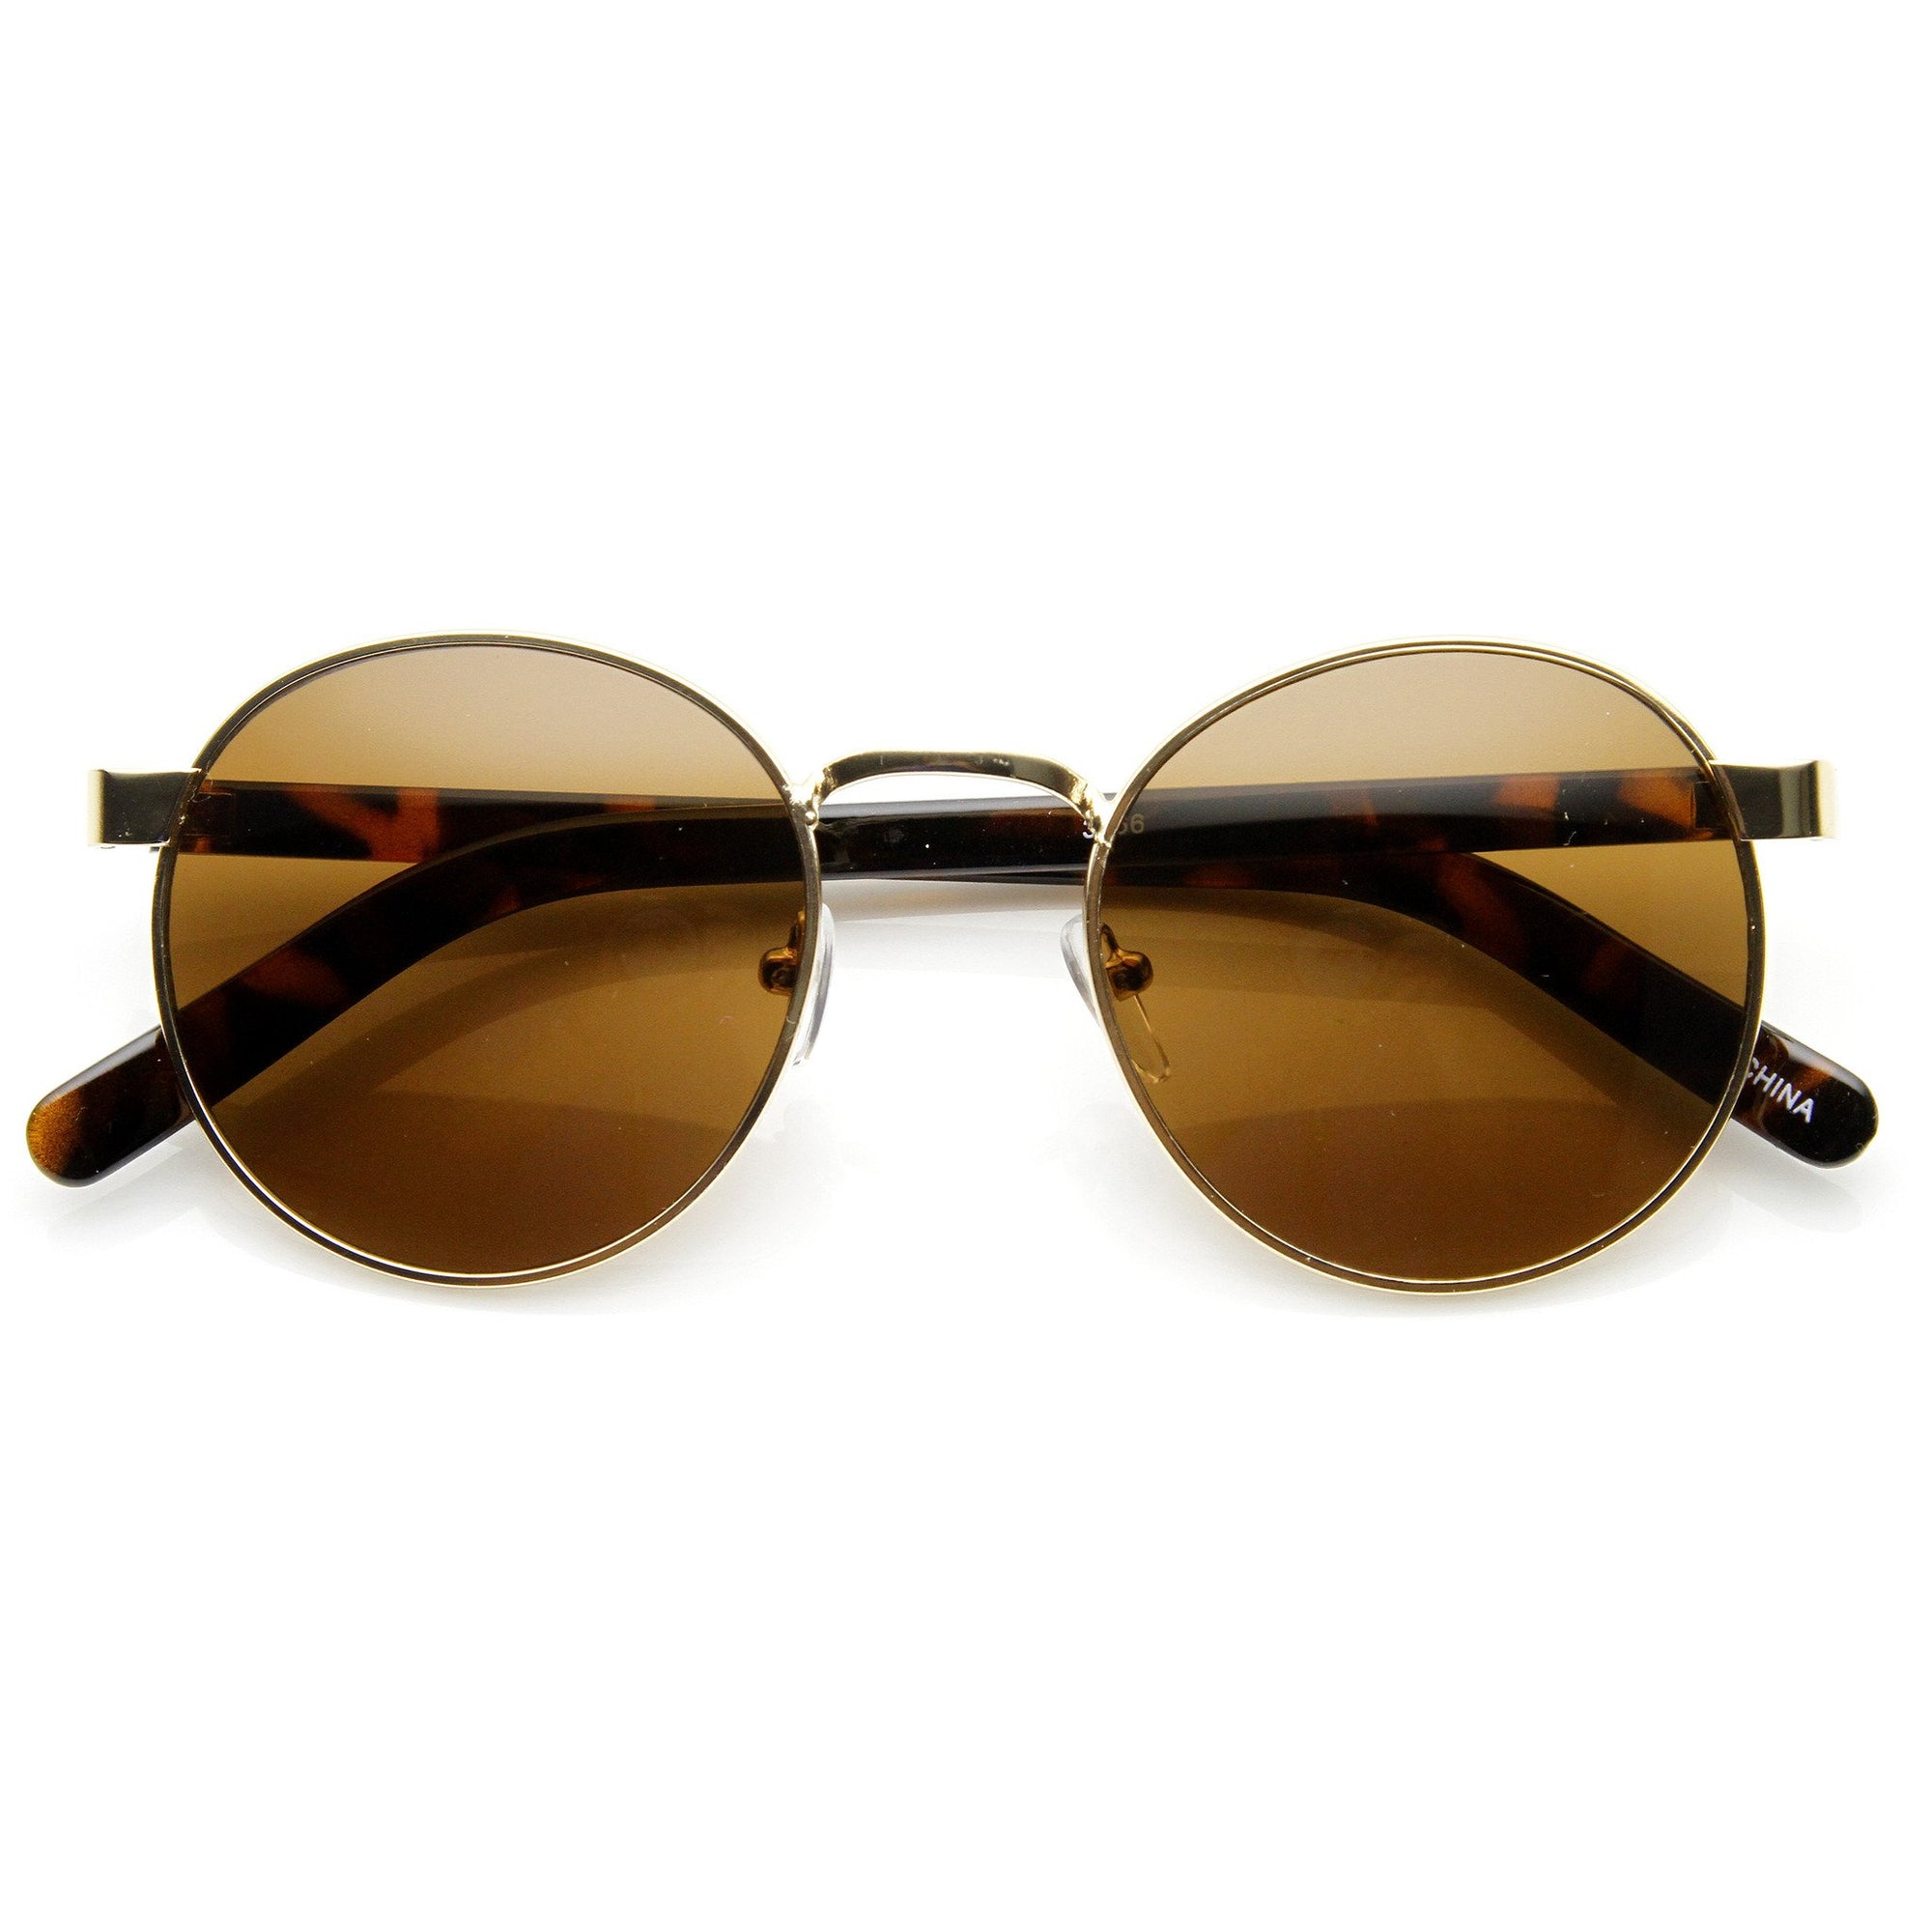 Vintage Inspired Dapper Round P3 Spectacle Sunglasses Zerouv